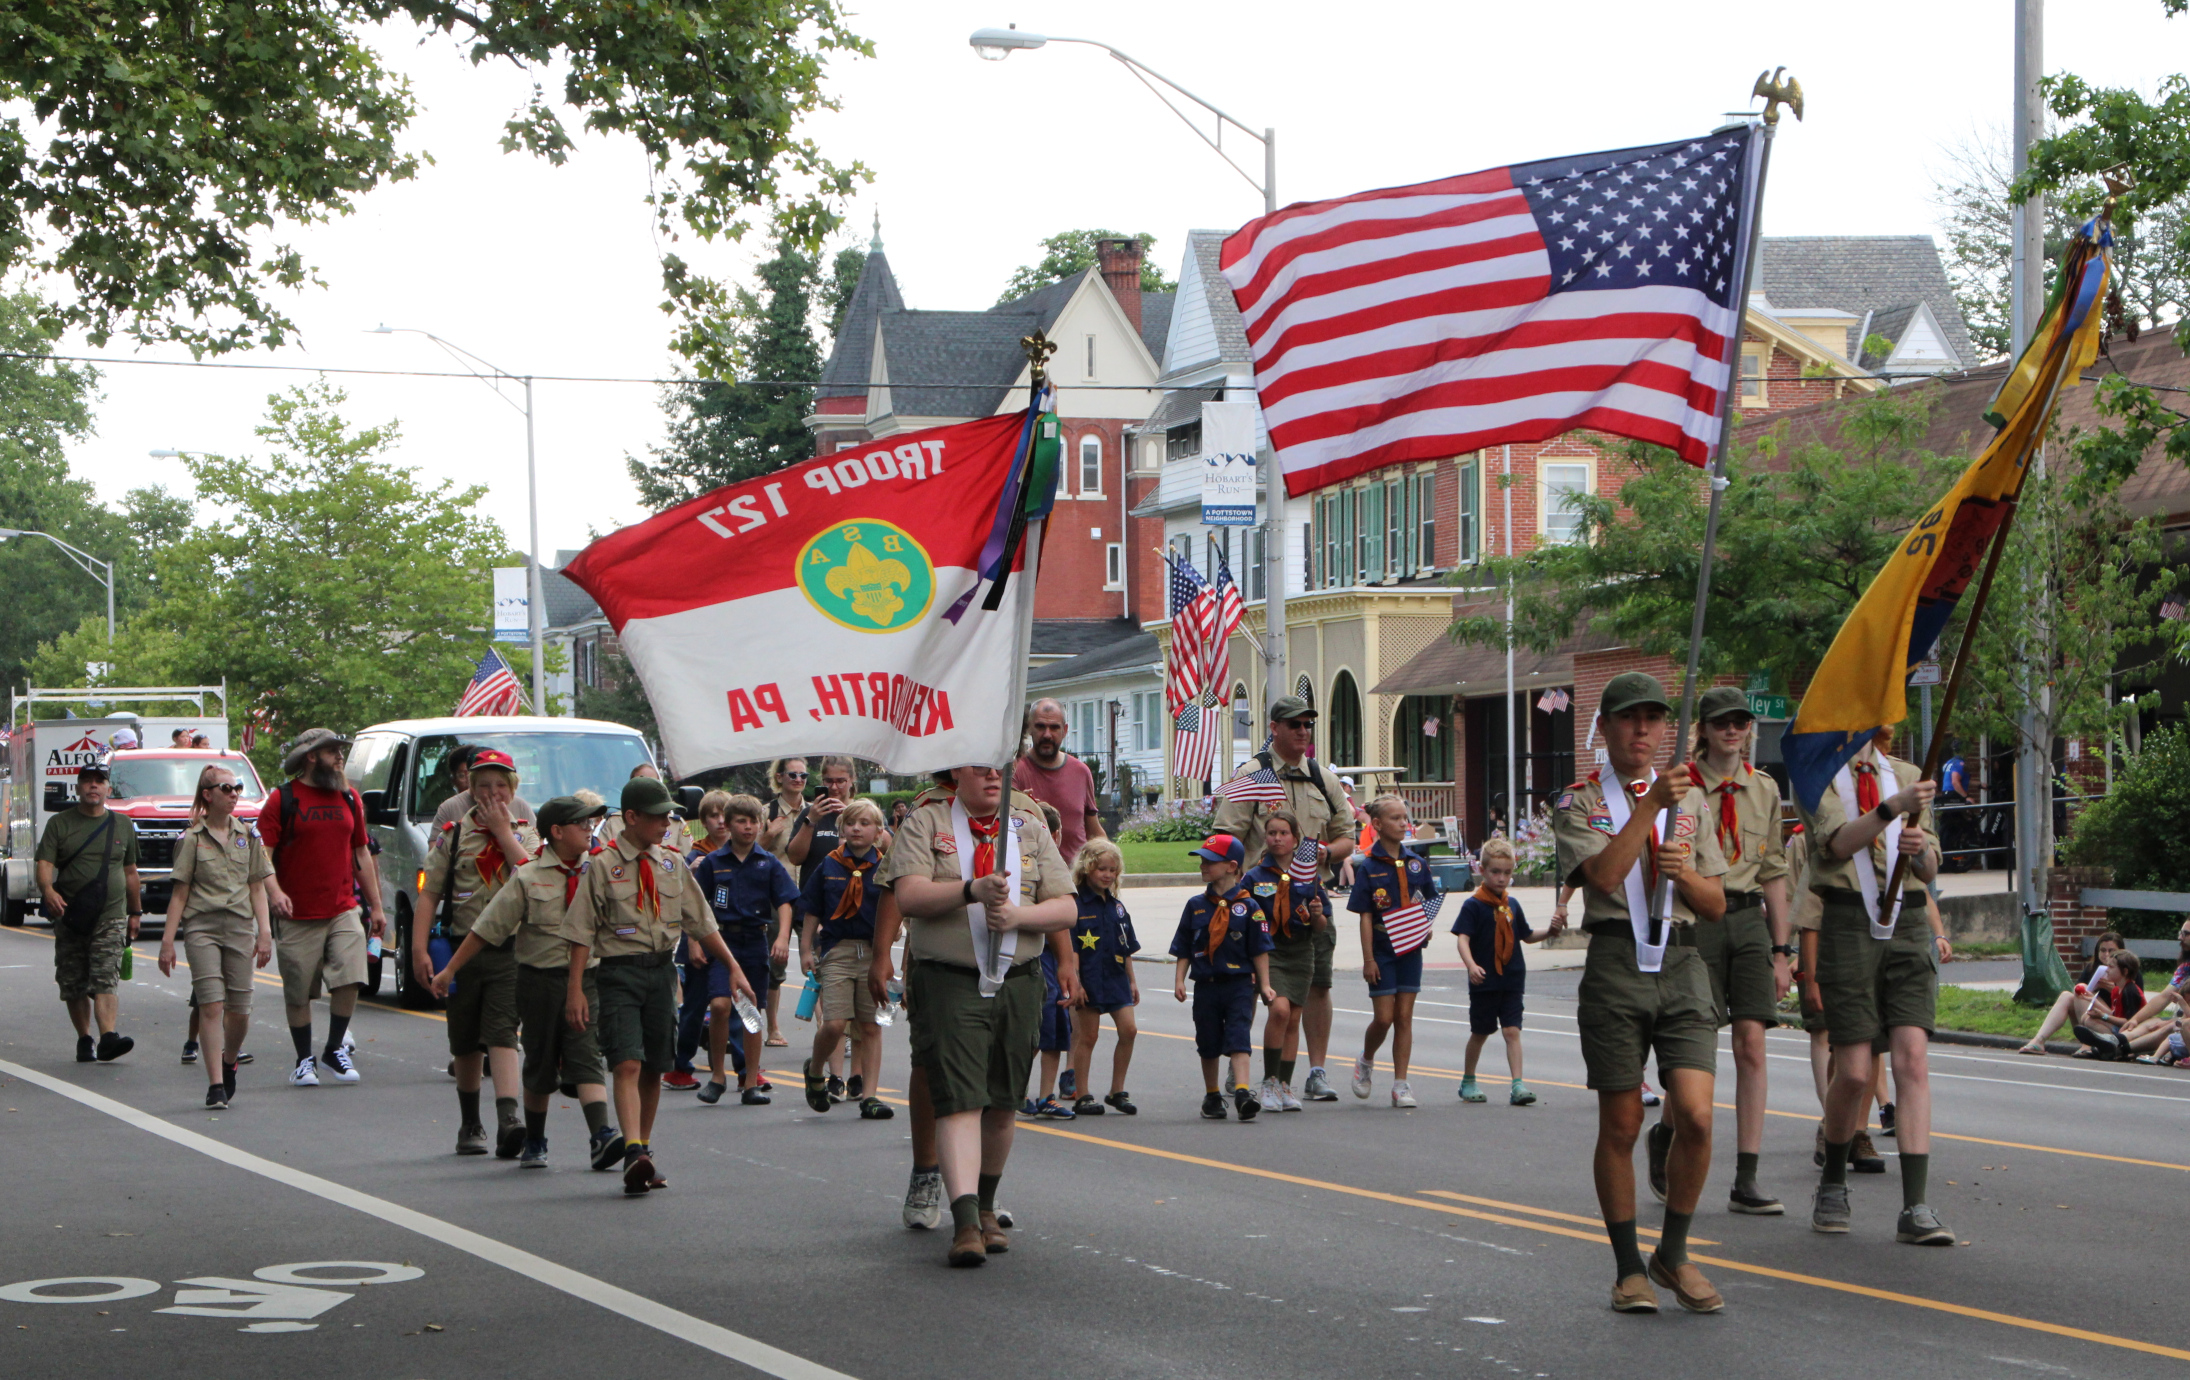 25 Photos, 3 Videos from Pottstown's Big July 4 Parade